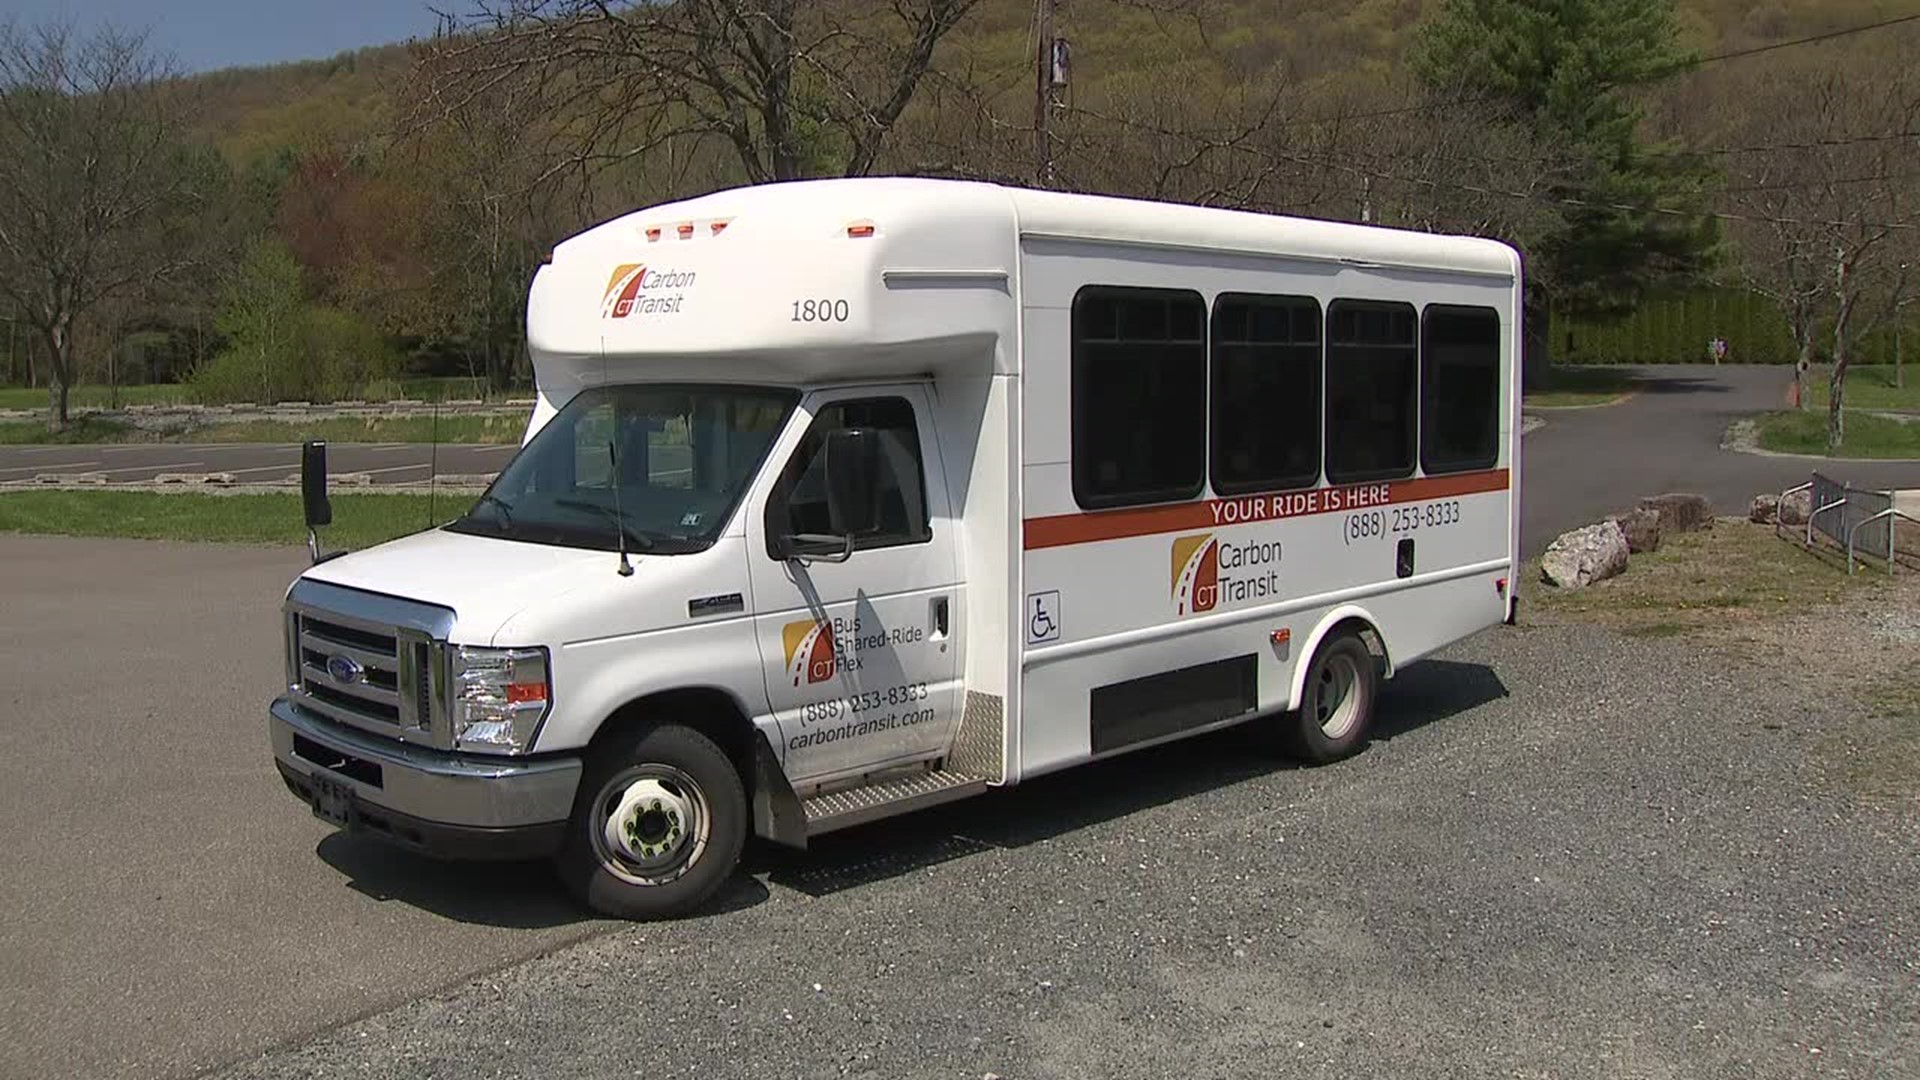 The bus is meant for children and families in Nesquehoning, Lansford, Summit Hill, and Jim Thorpe.